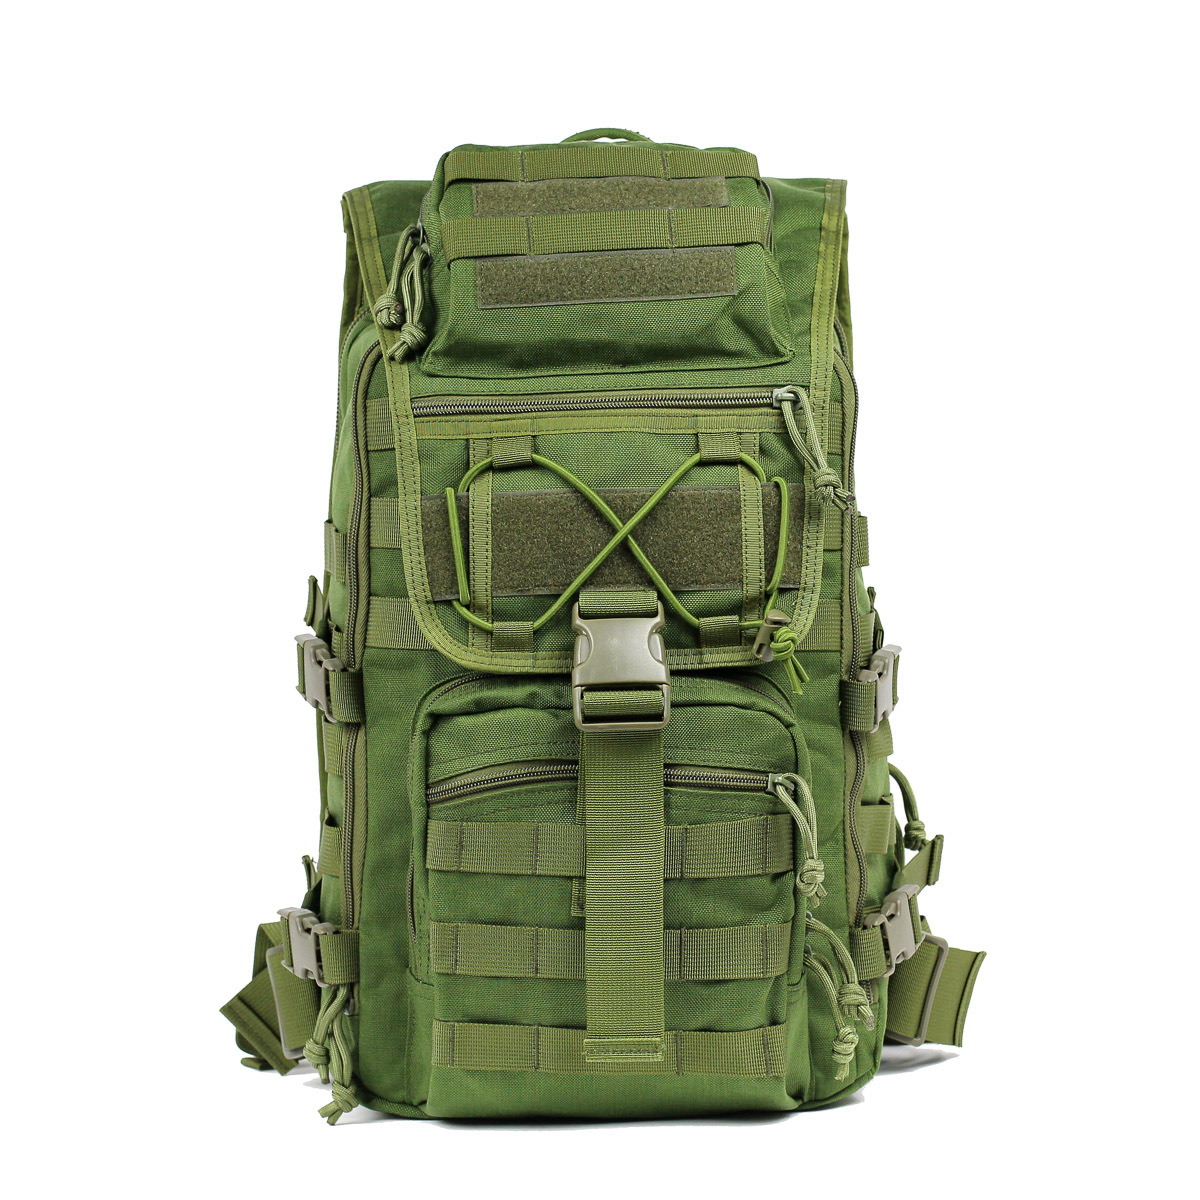 Unisex Outdoor Military Army Tactical Backpack Trekking Travel Rucksack Camping Hiking Trekking Camouflage Bag